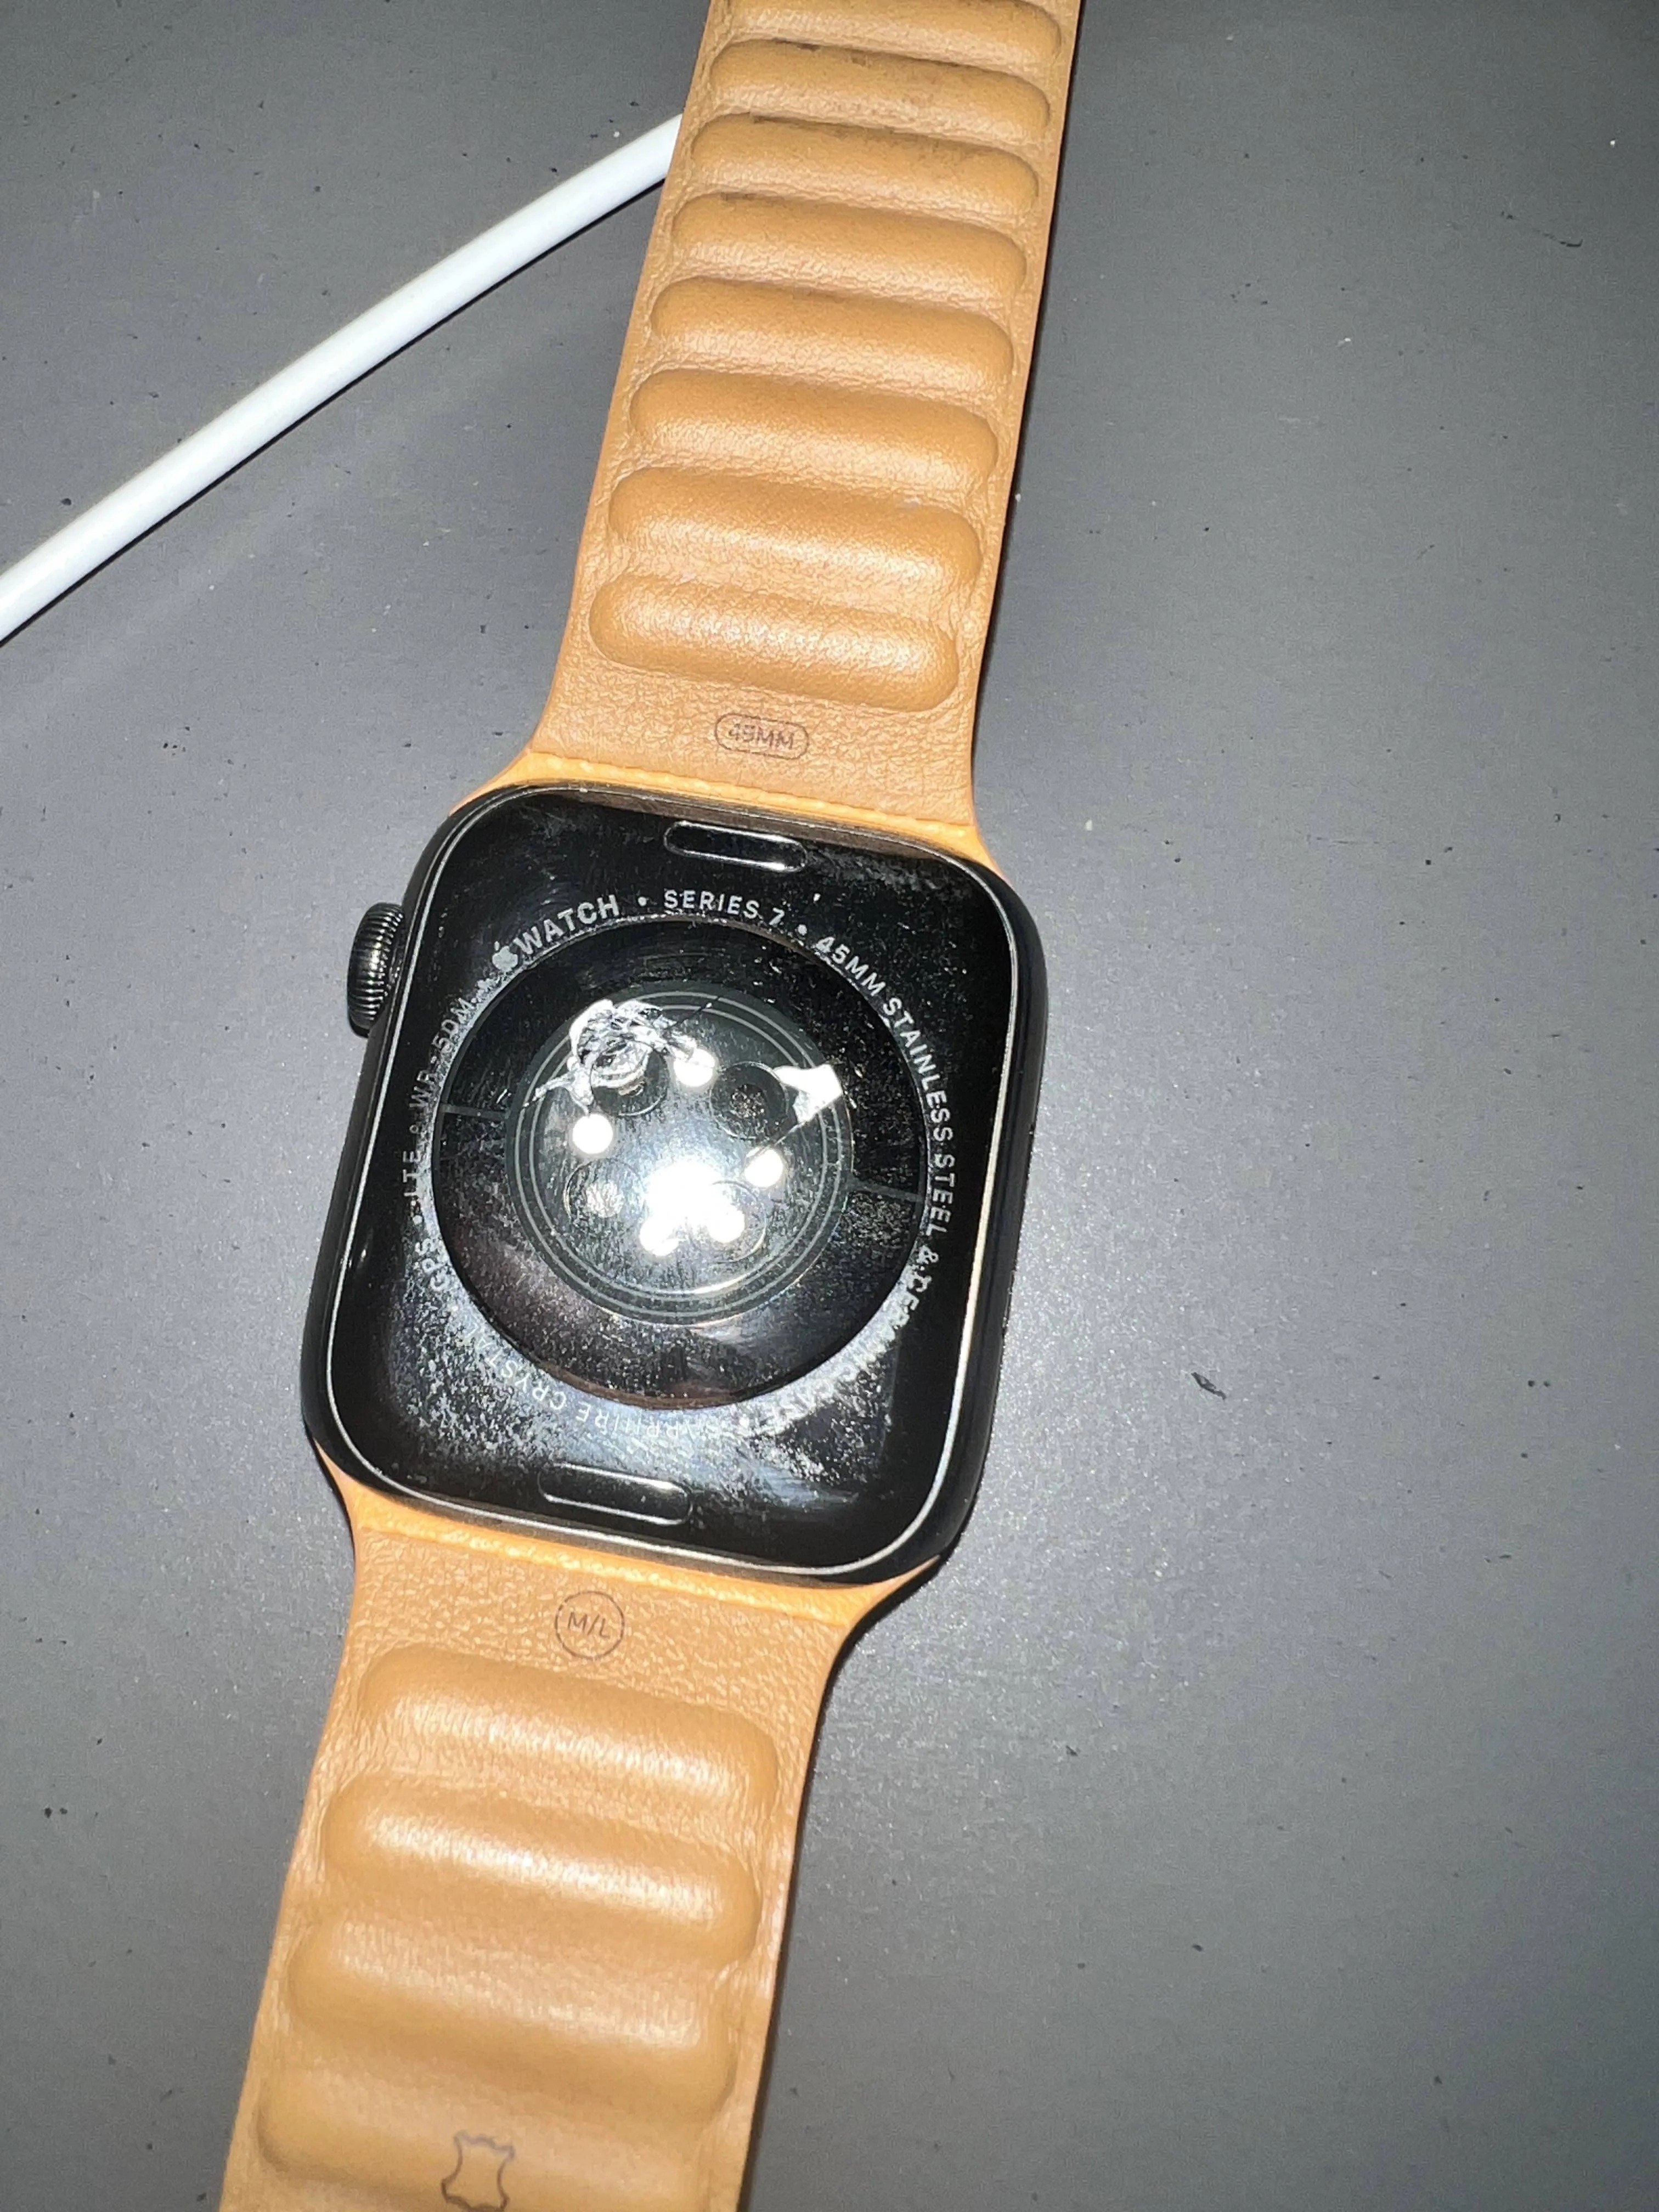 Apple Watch phat no anh 2